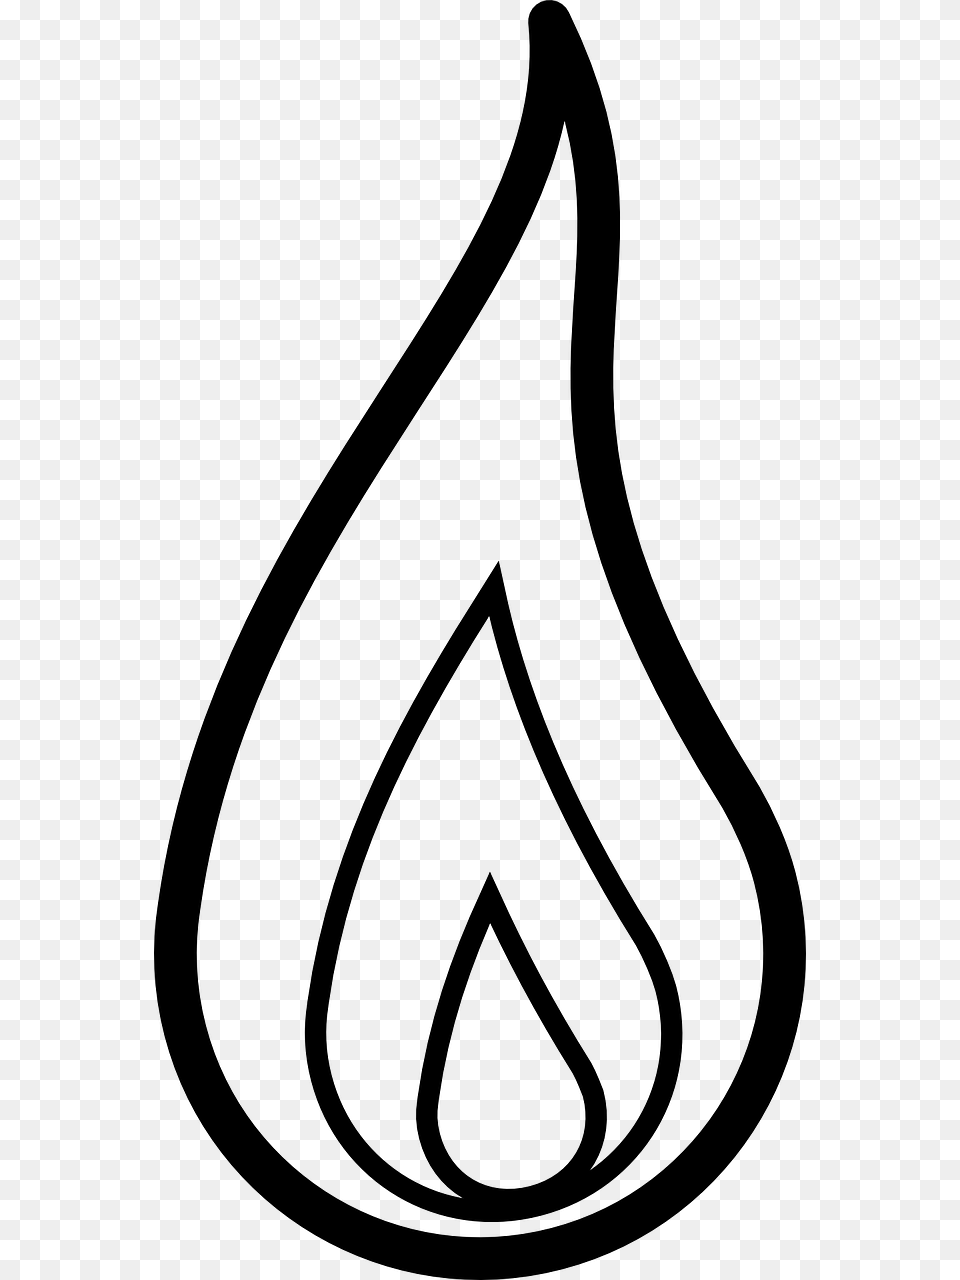 Tribal Flame Drawings Easy Blue Candle Drawing Flame Clipart Black And White, Gray Free Transparent Png